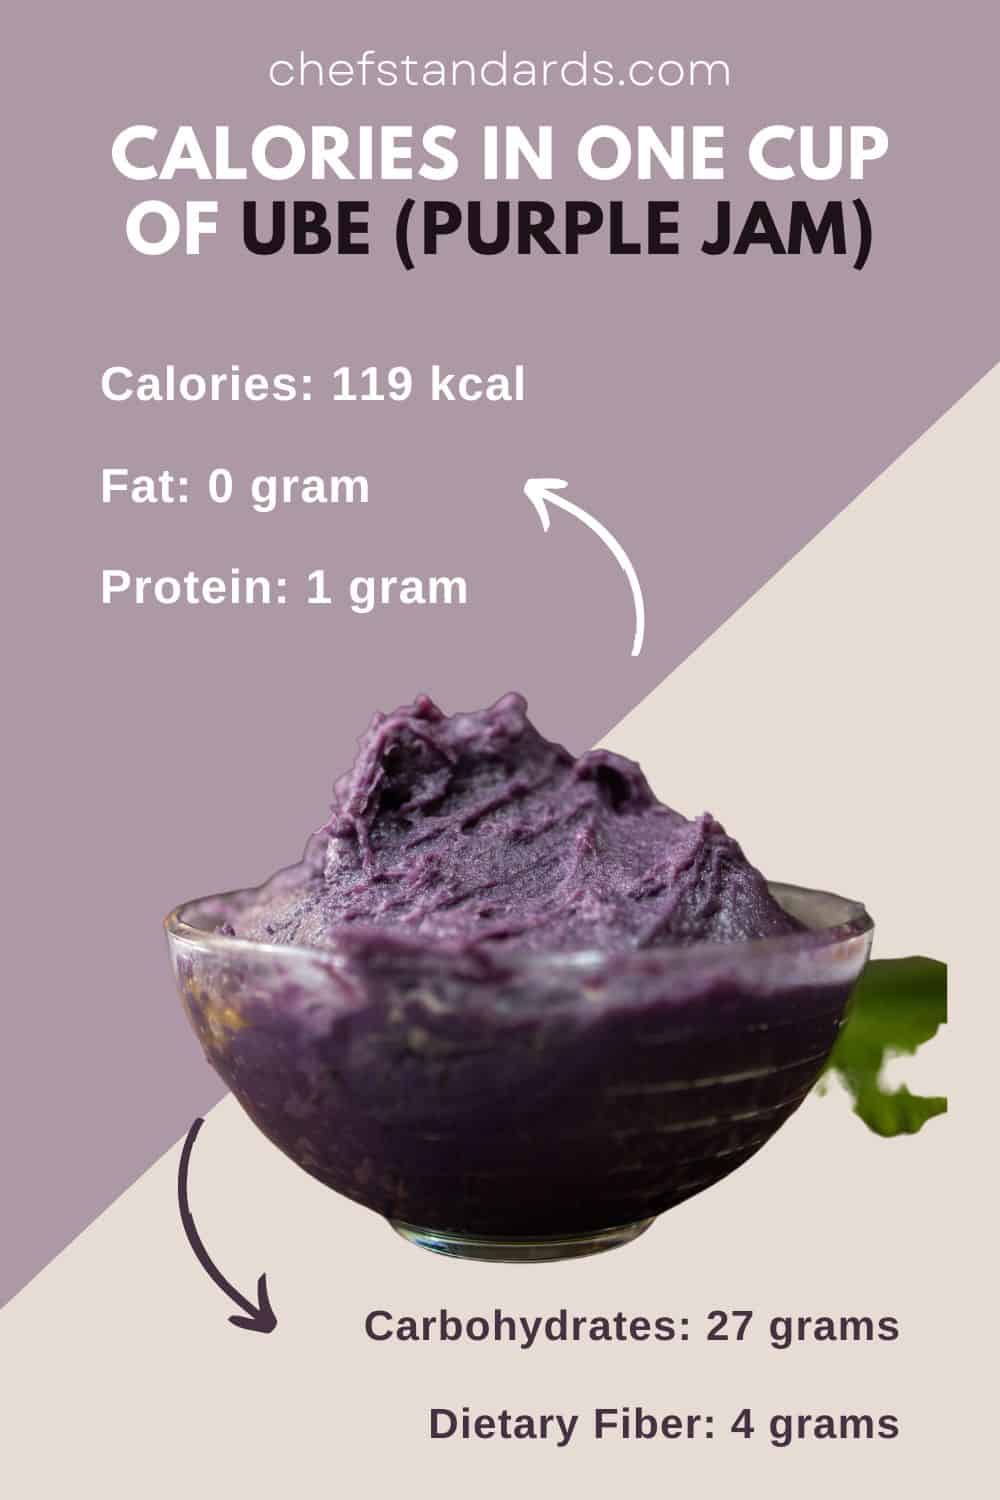 Calories In One Cup Of Ube (Purple Jam)